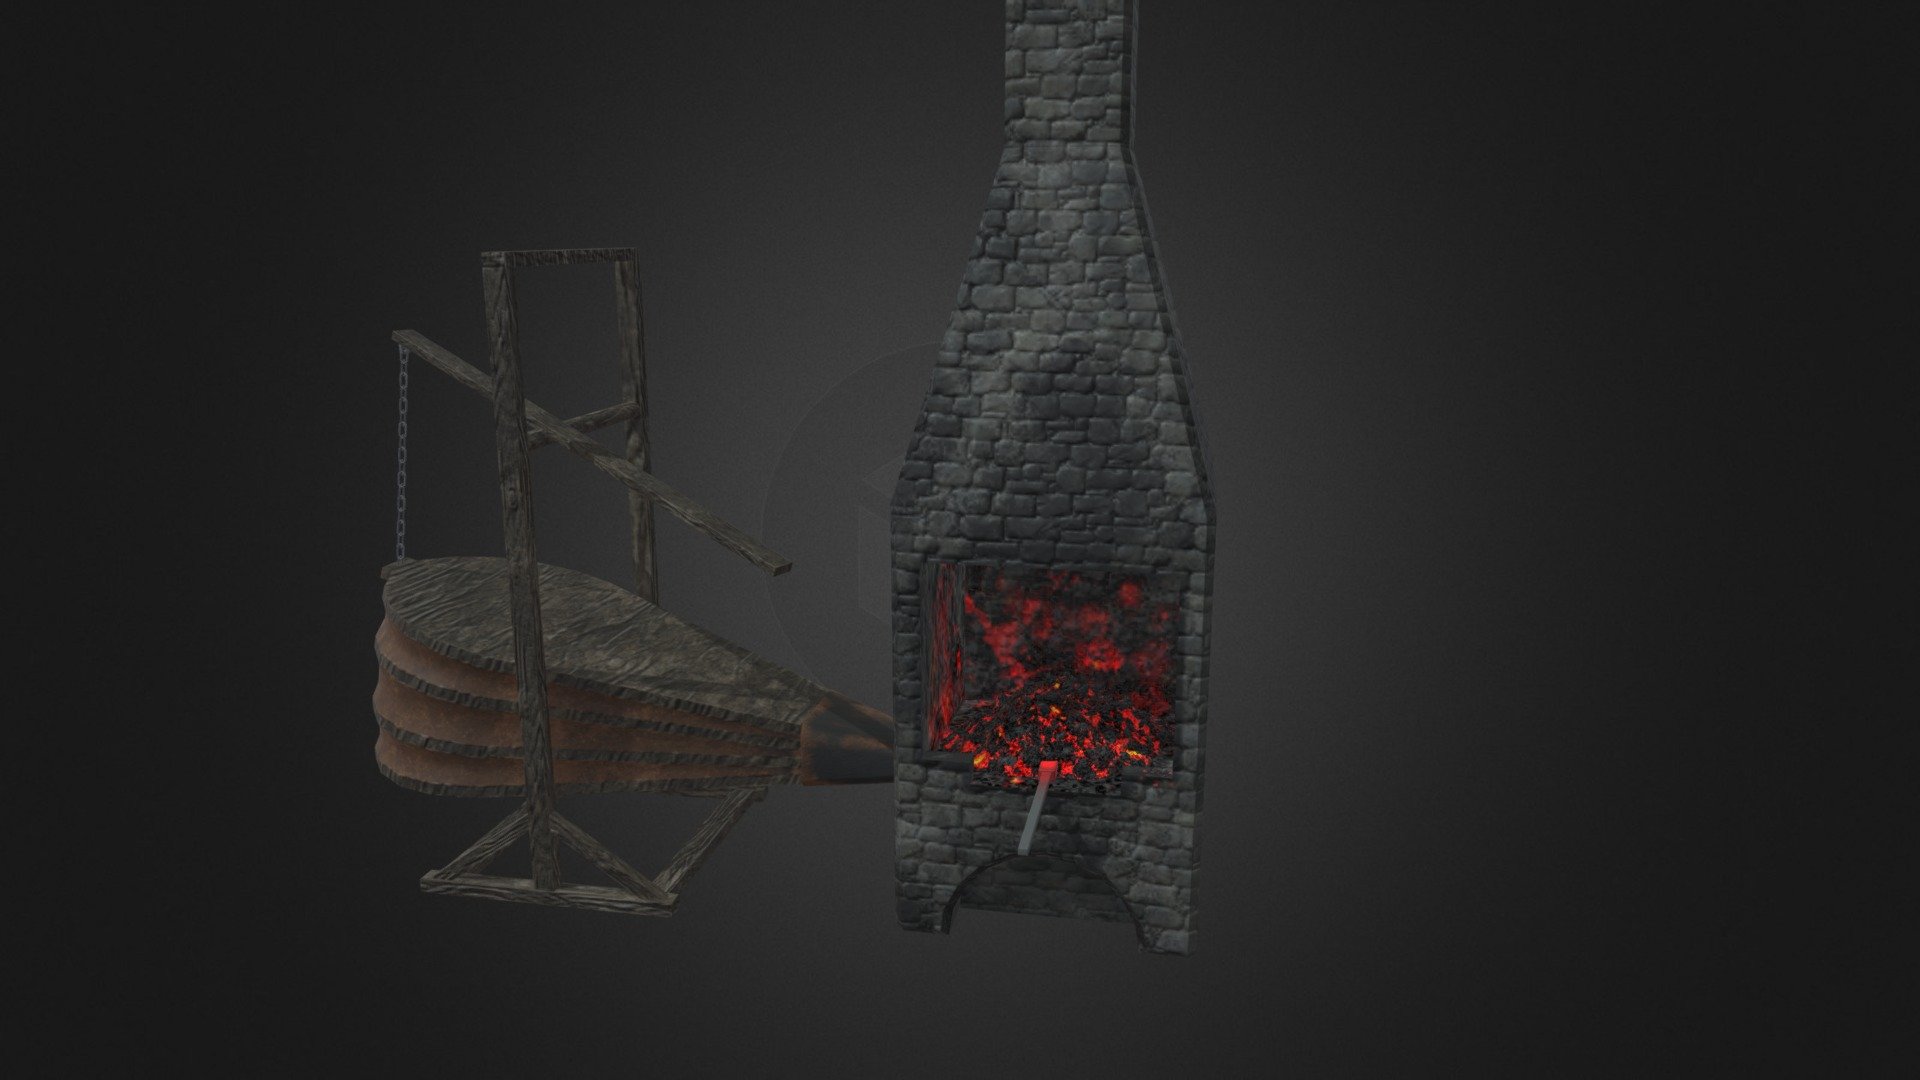 These assets were created for the Blacksmith Forge environment 3d model